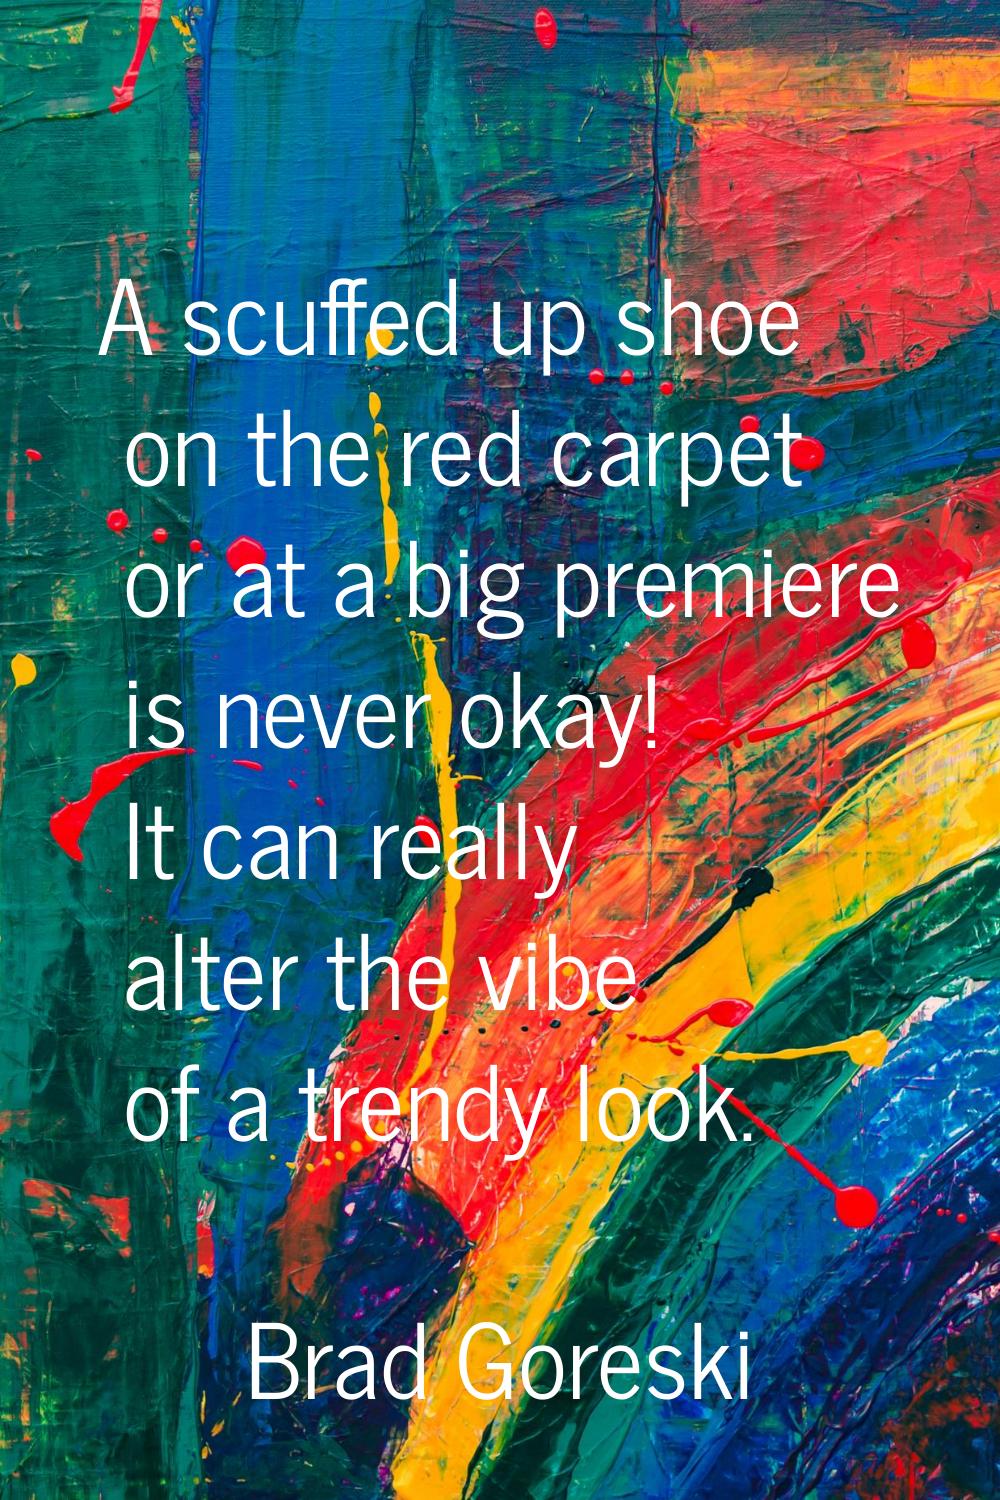 A scuffed up shoe on the red carpet or at a big premiere is never okay! It can really alter the vib